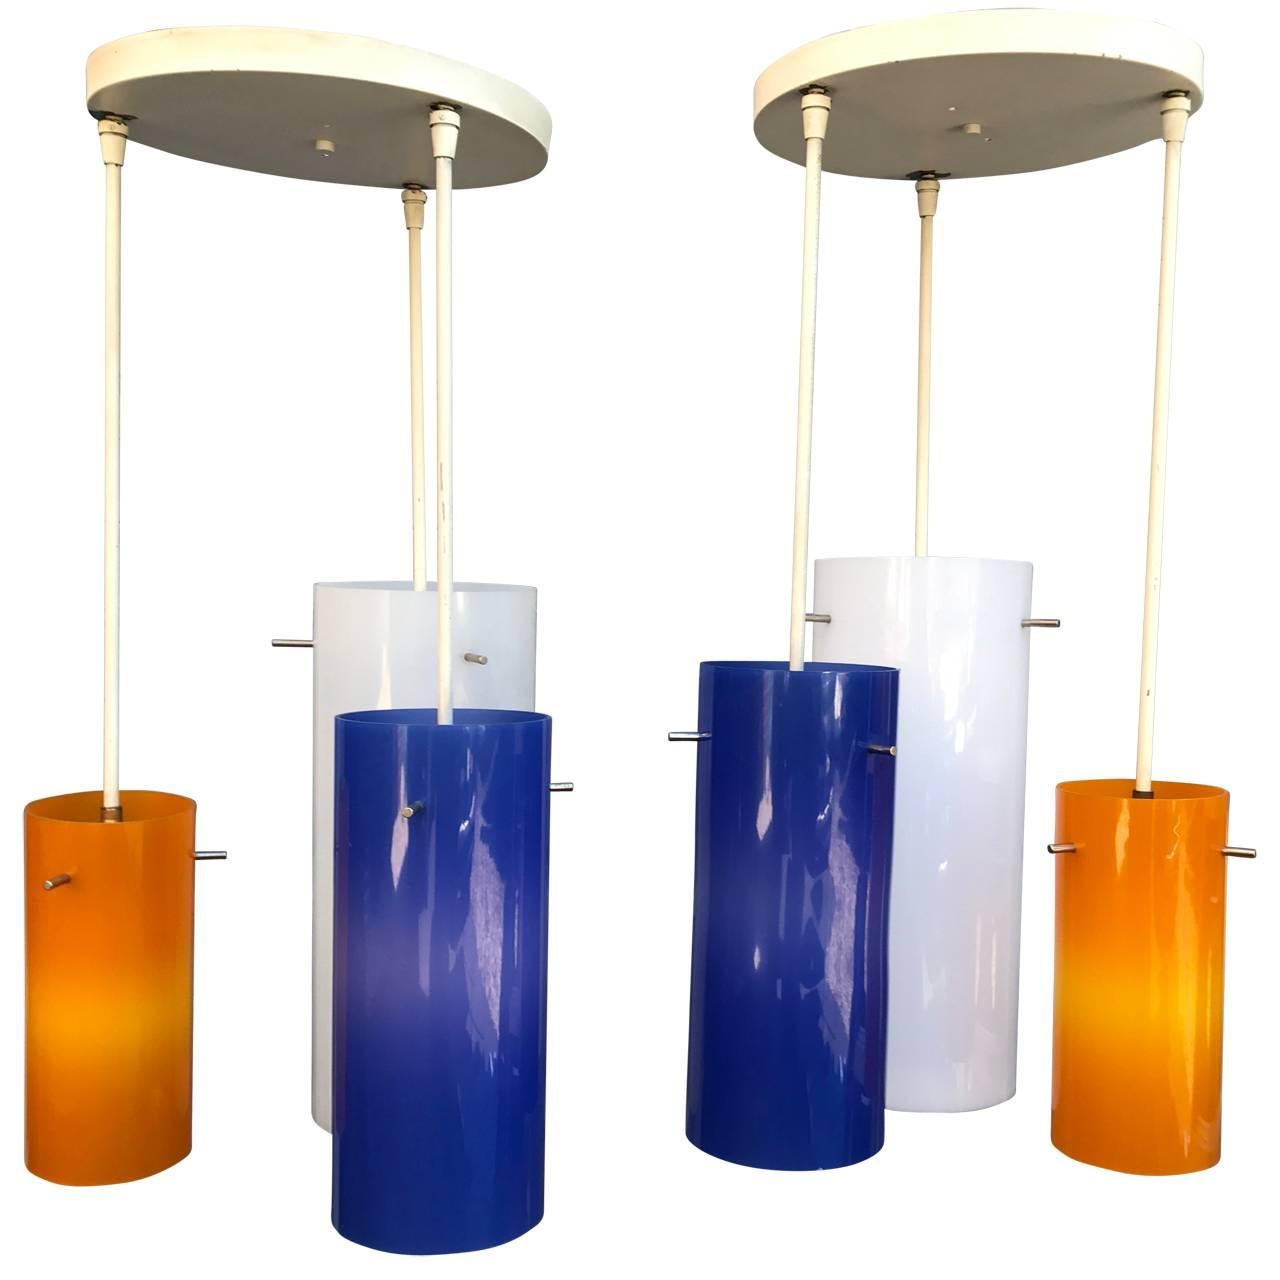 Pair of Two Lucite Blue and Orange Ceiling Lights In Good Condition For Sale In Haddonfield, NJ